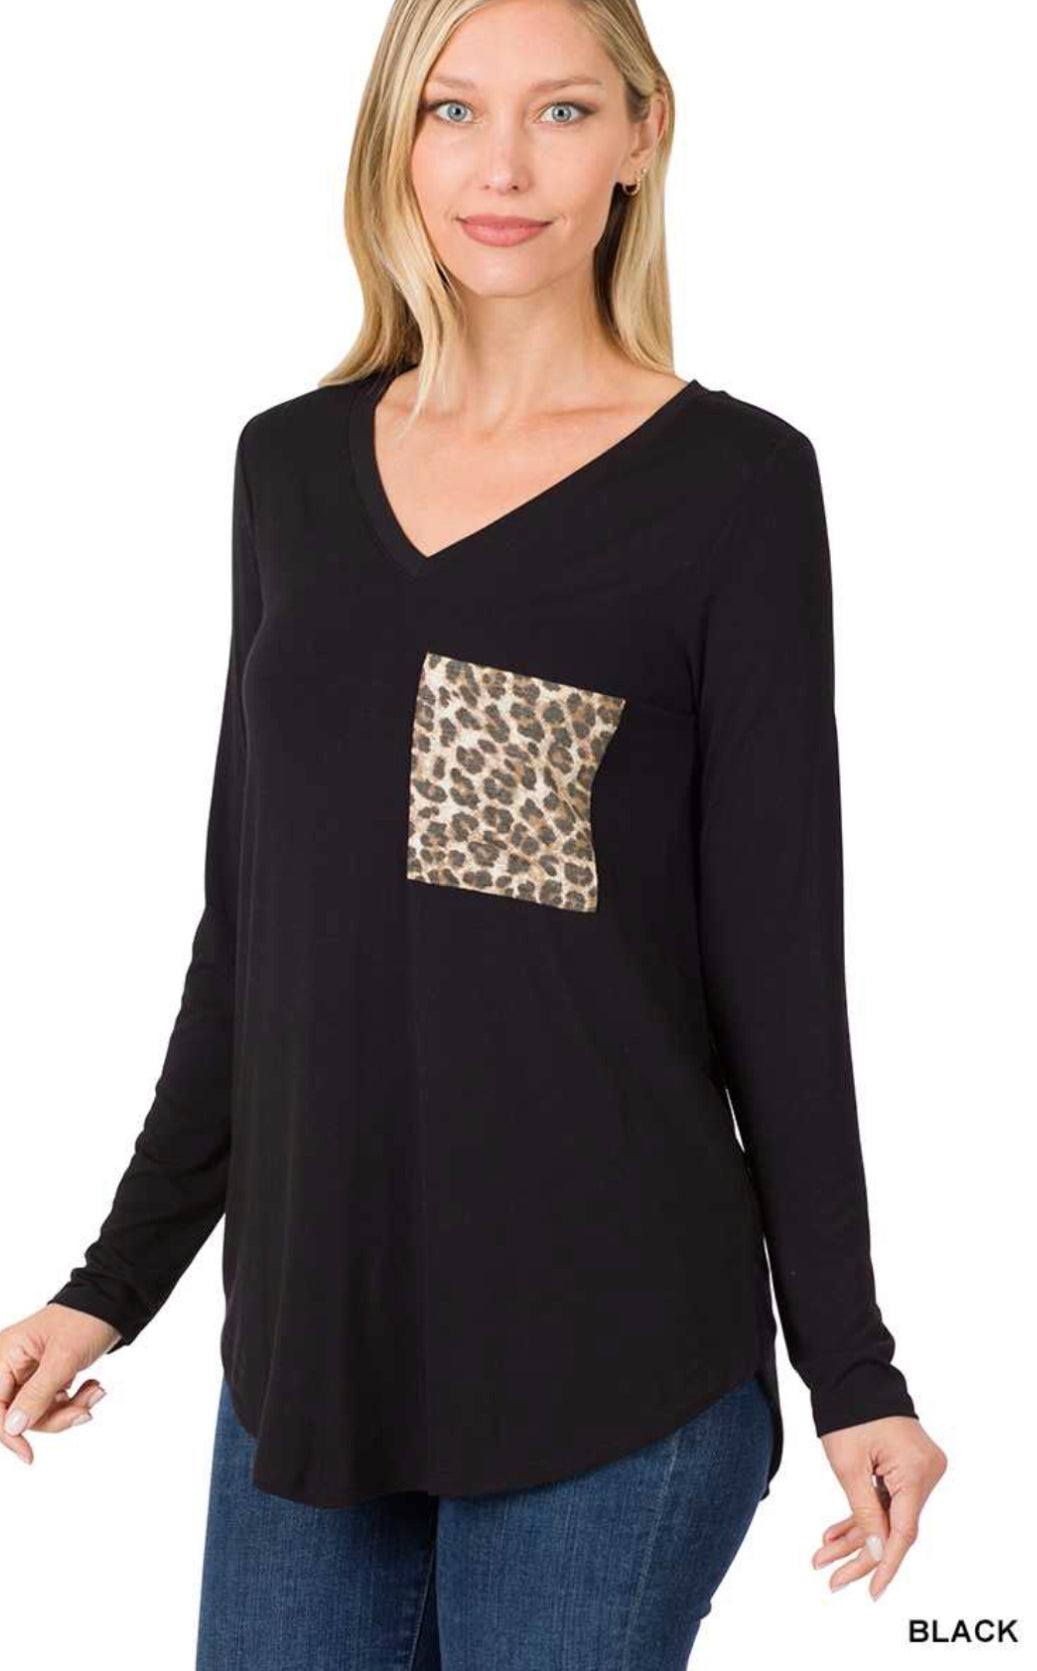 The Lux Cheetah Top